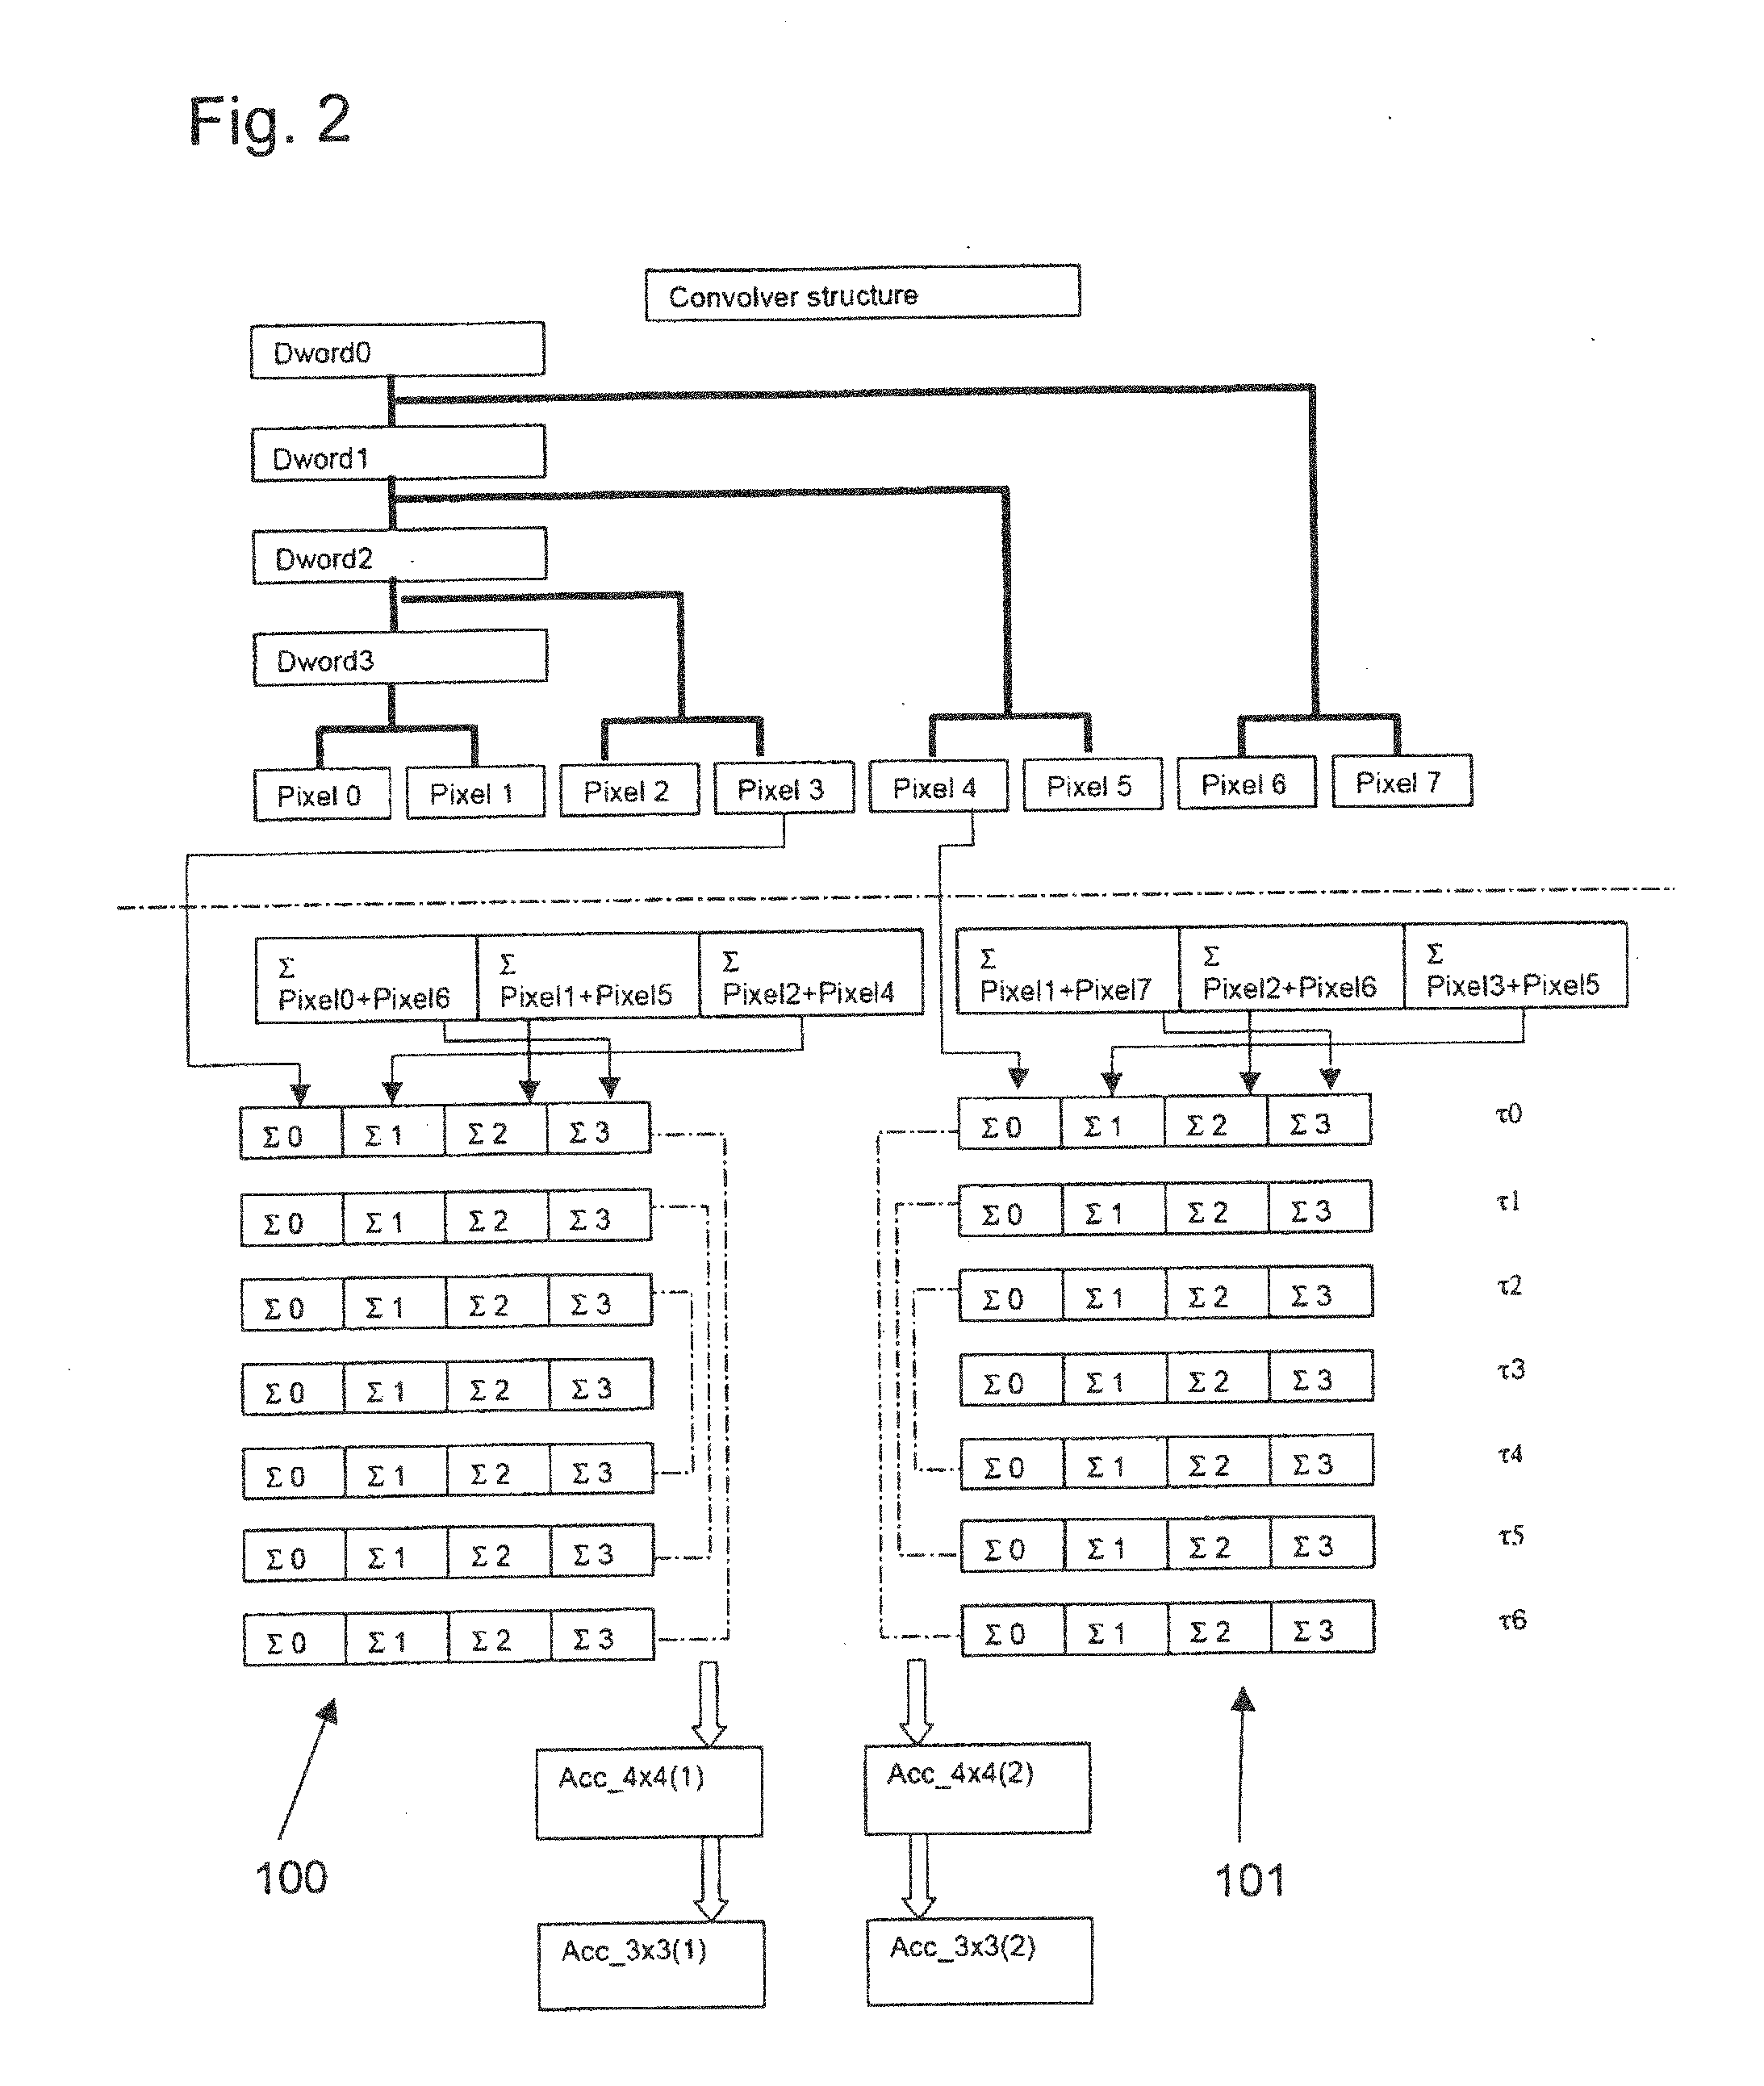 Image-processing device for color image data and method for the image processing of color image data